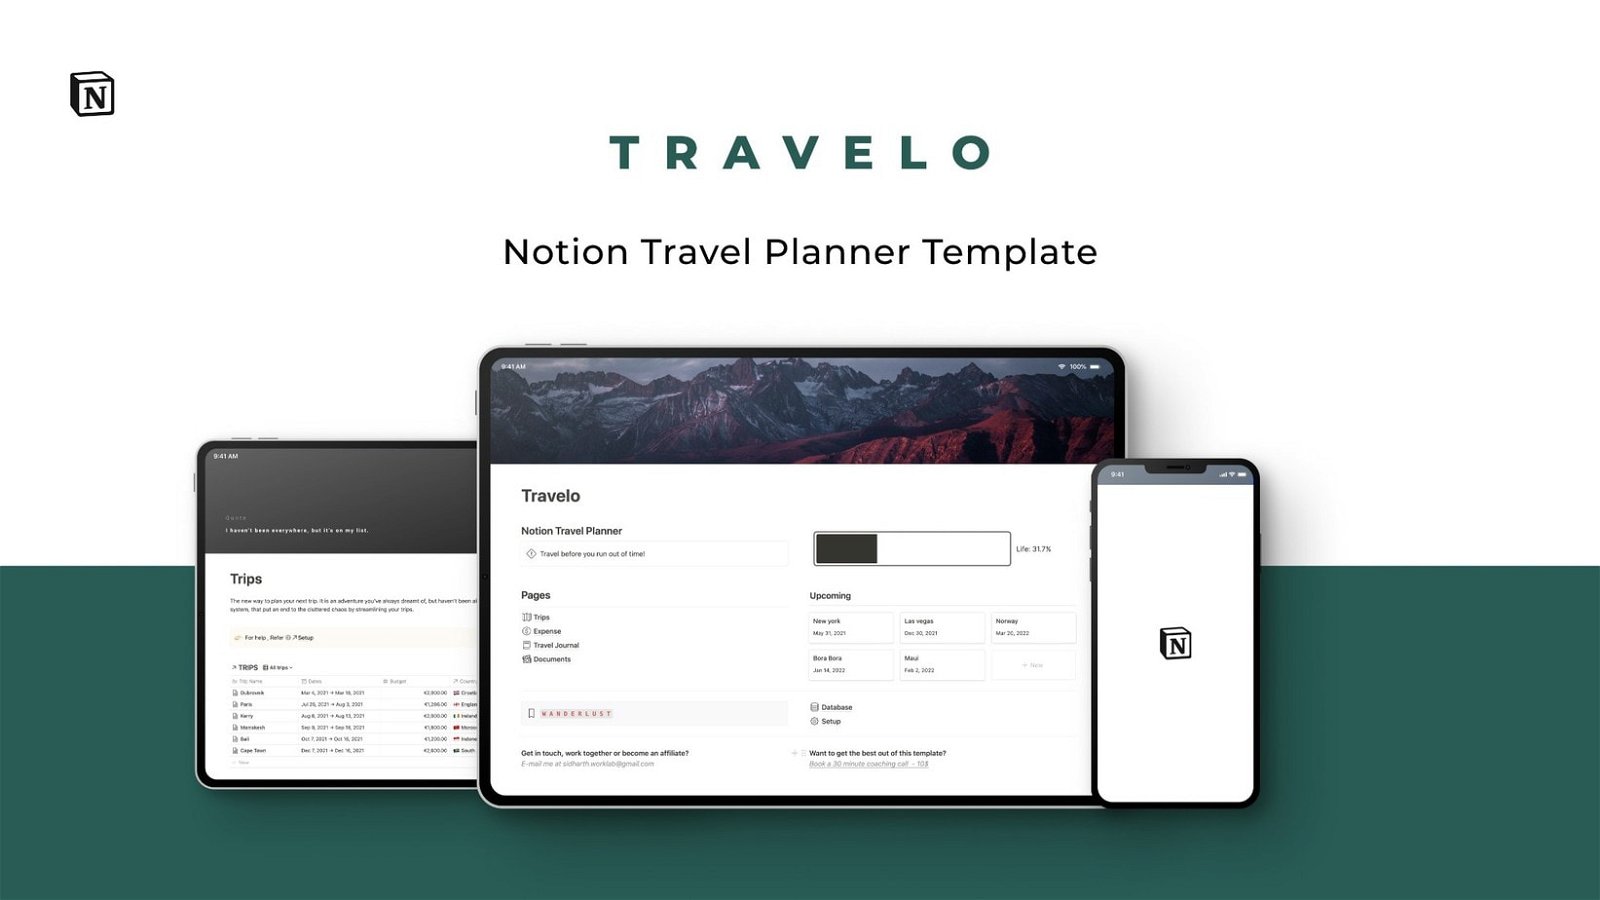 Travelo - Notion Travel Planner Template